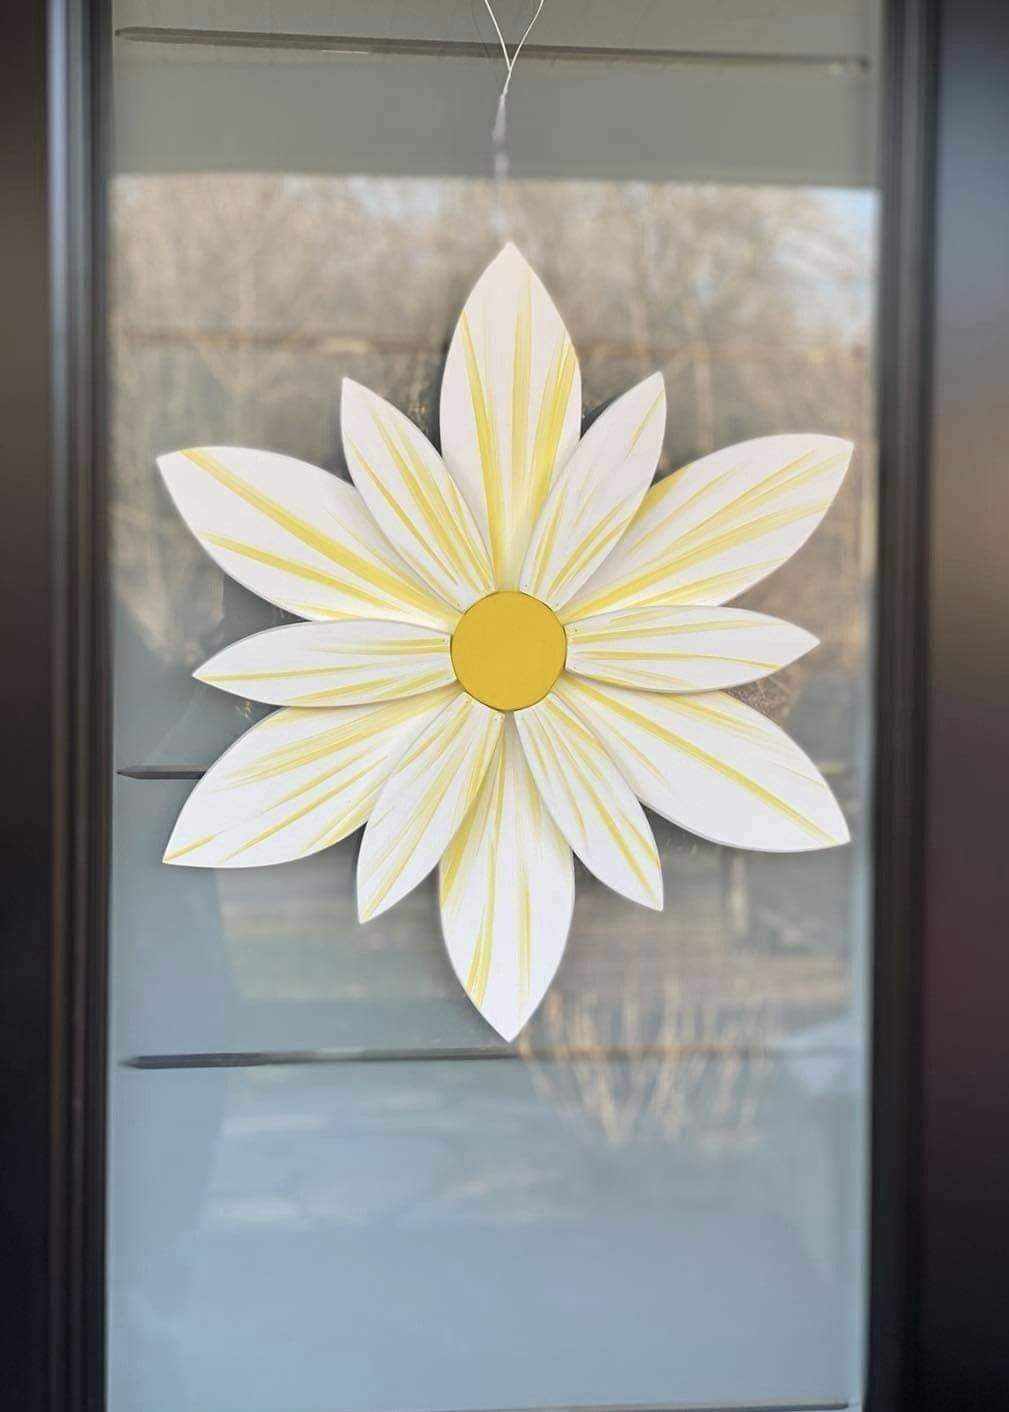 Atlantic Wood N Wares Home & Garden>Home Décor>Wall Decor>Wall Hangings Small 22 x 22 inches Brighten up your space with our charming sunburst flower wood art SFSBS001